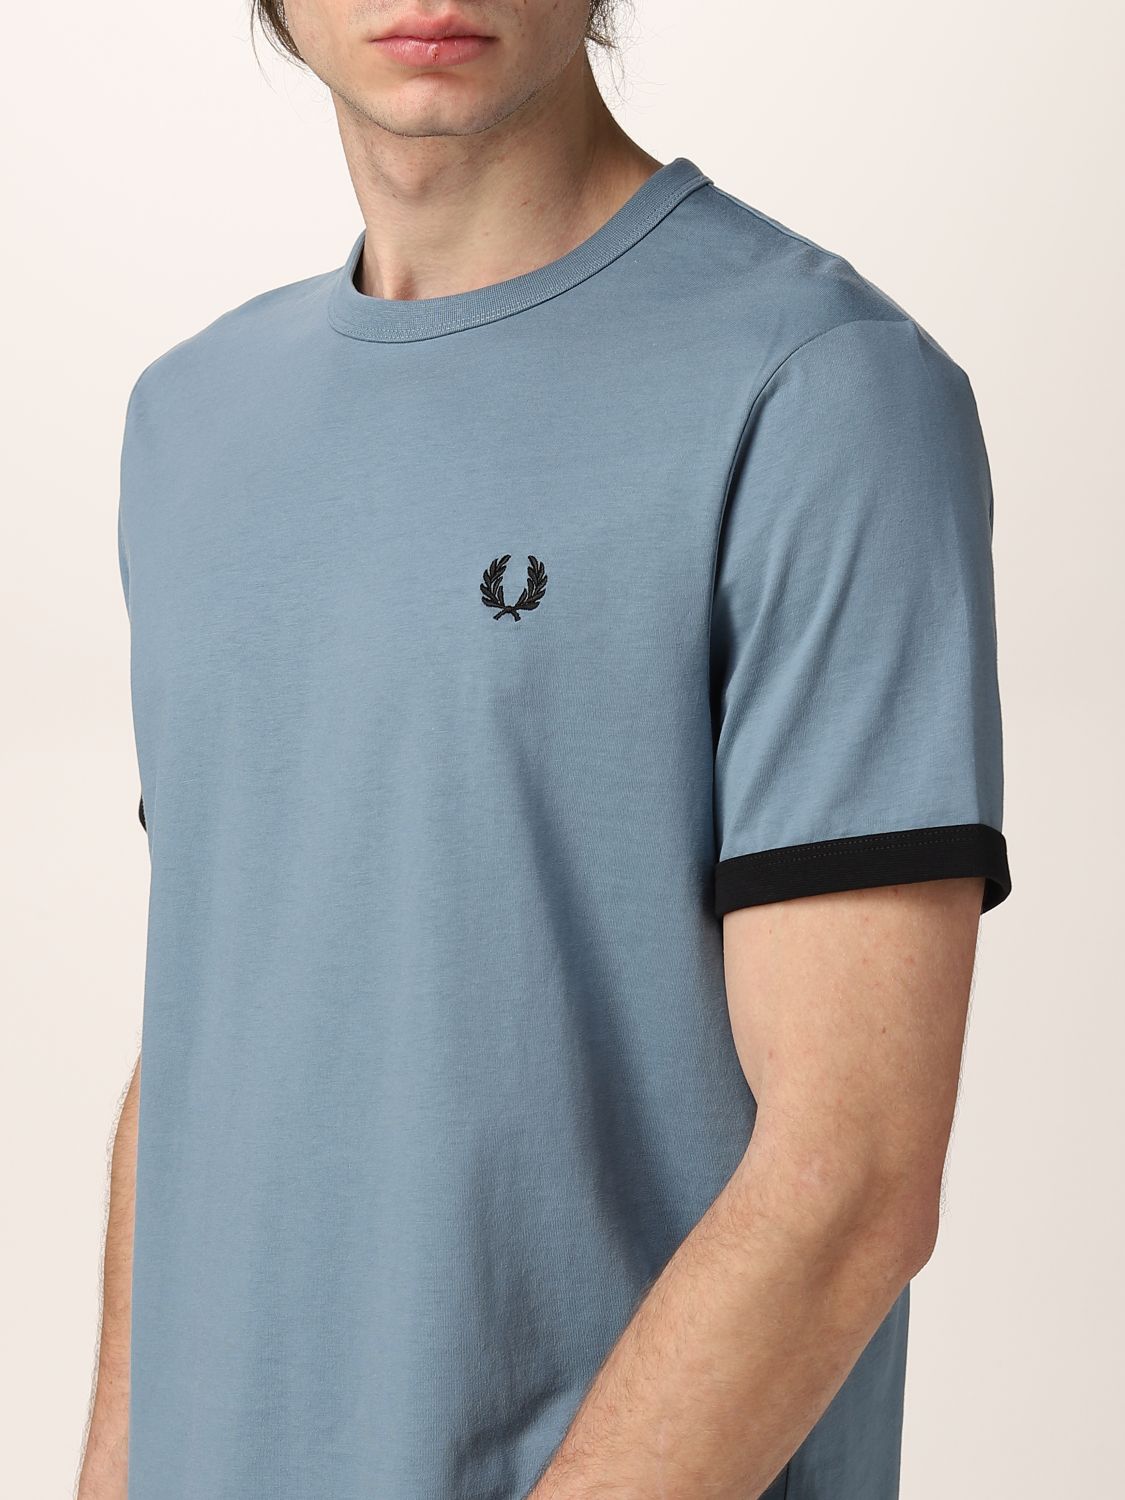 Tシャツ Fred Perry: Tシャツ Fred Perry メンズ スカイ 3